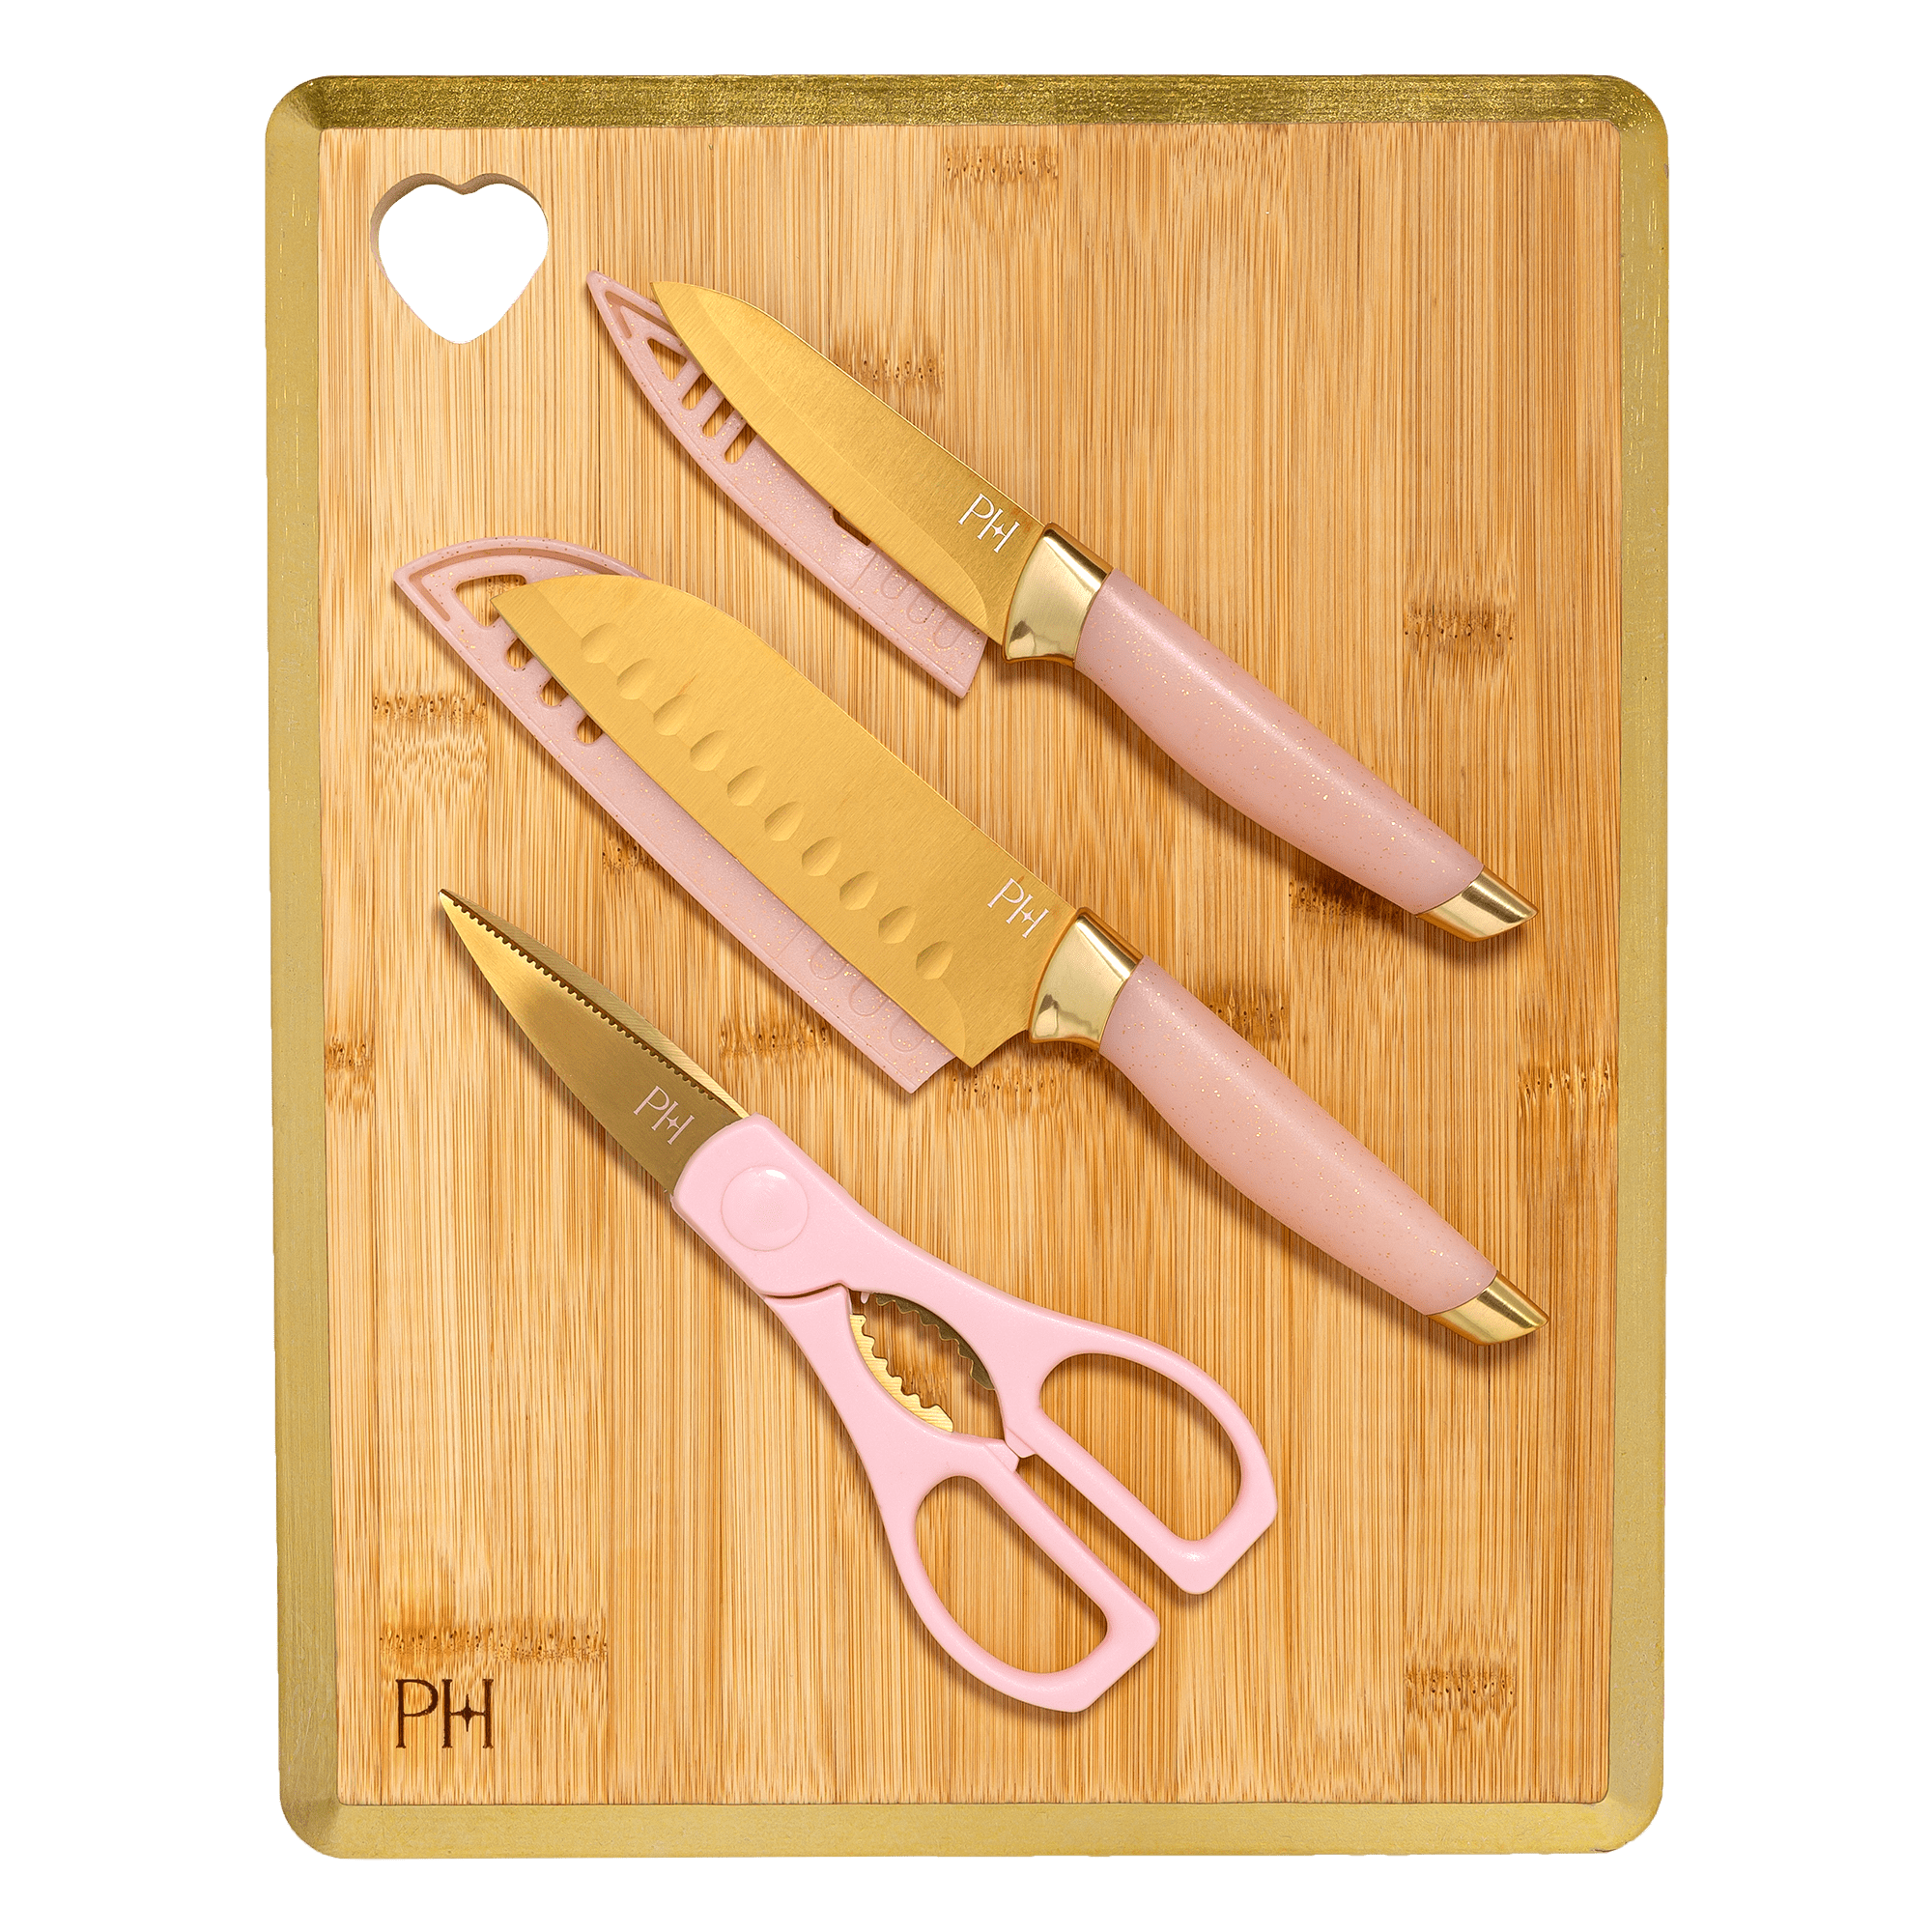 Paris Hilton 6-Piece Stainless Steel Cutlery Set with Bamboo Reversible  Cutting Board, Pink